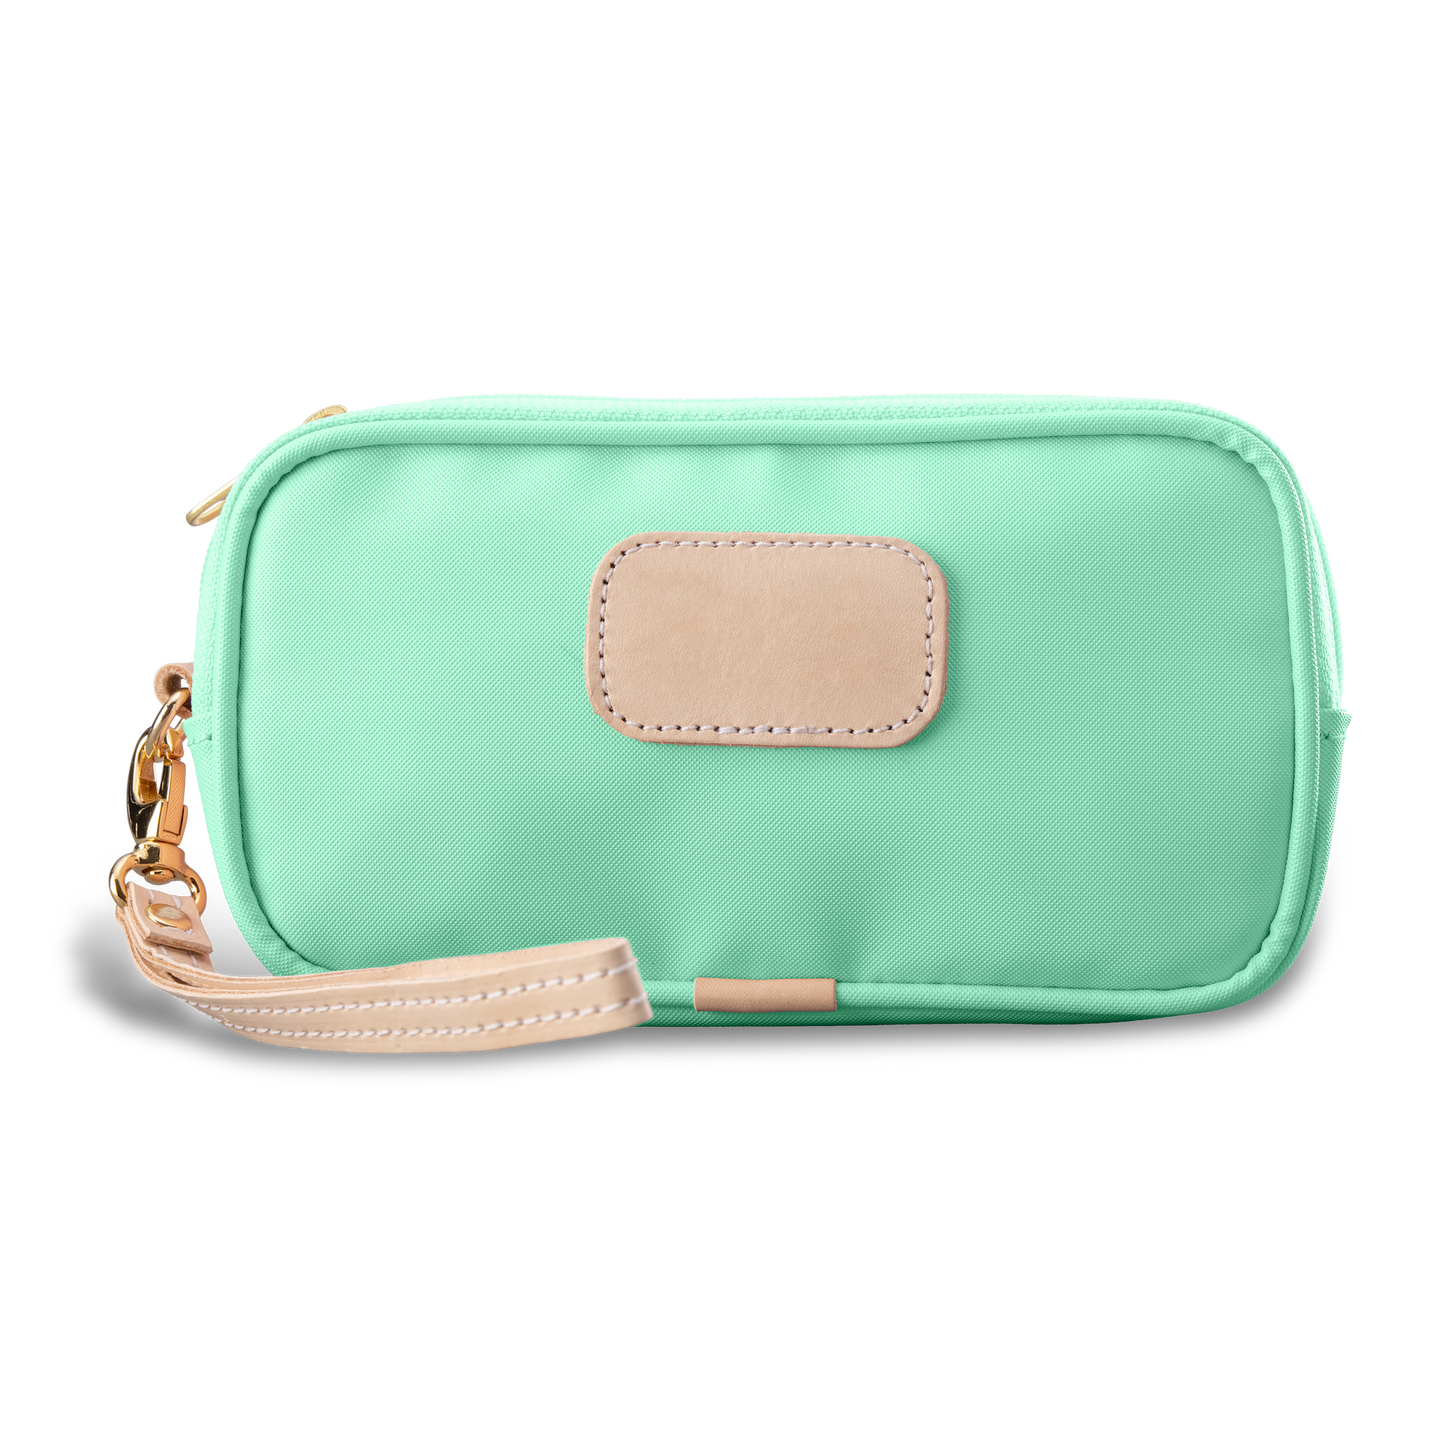 Wristlet - Mint Coated Canvas Front Angle in Color 'Mint Coated Canvas'